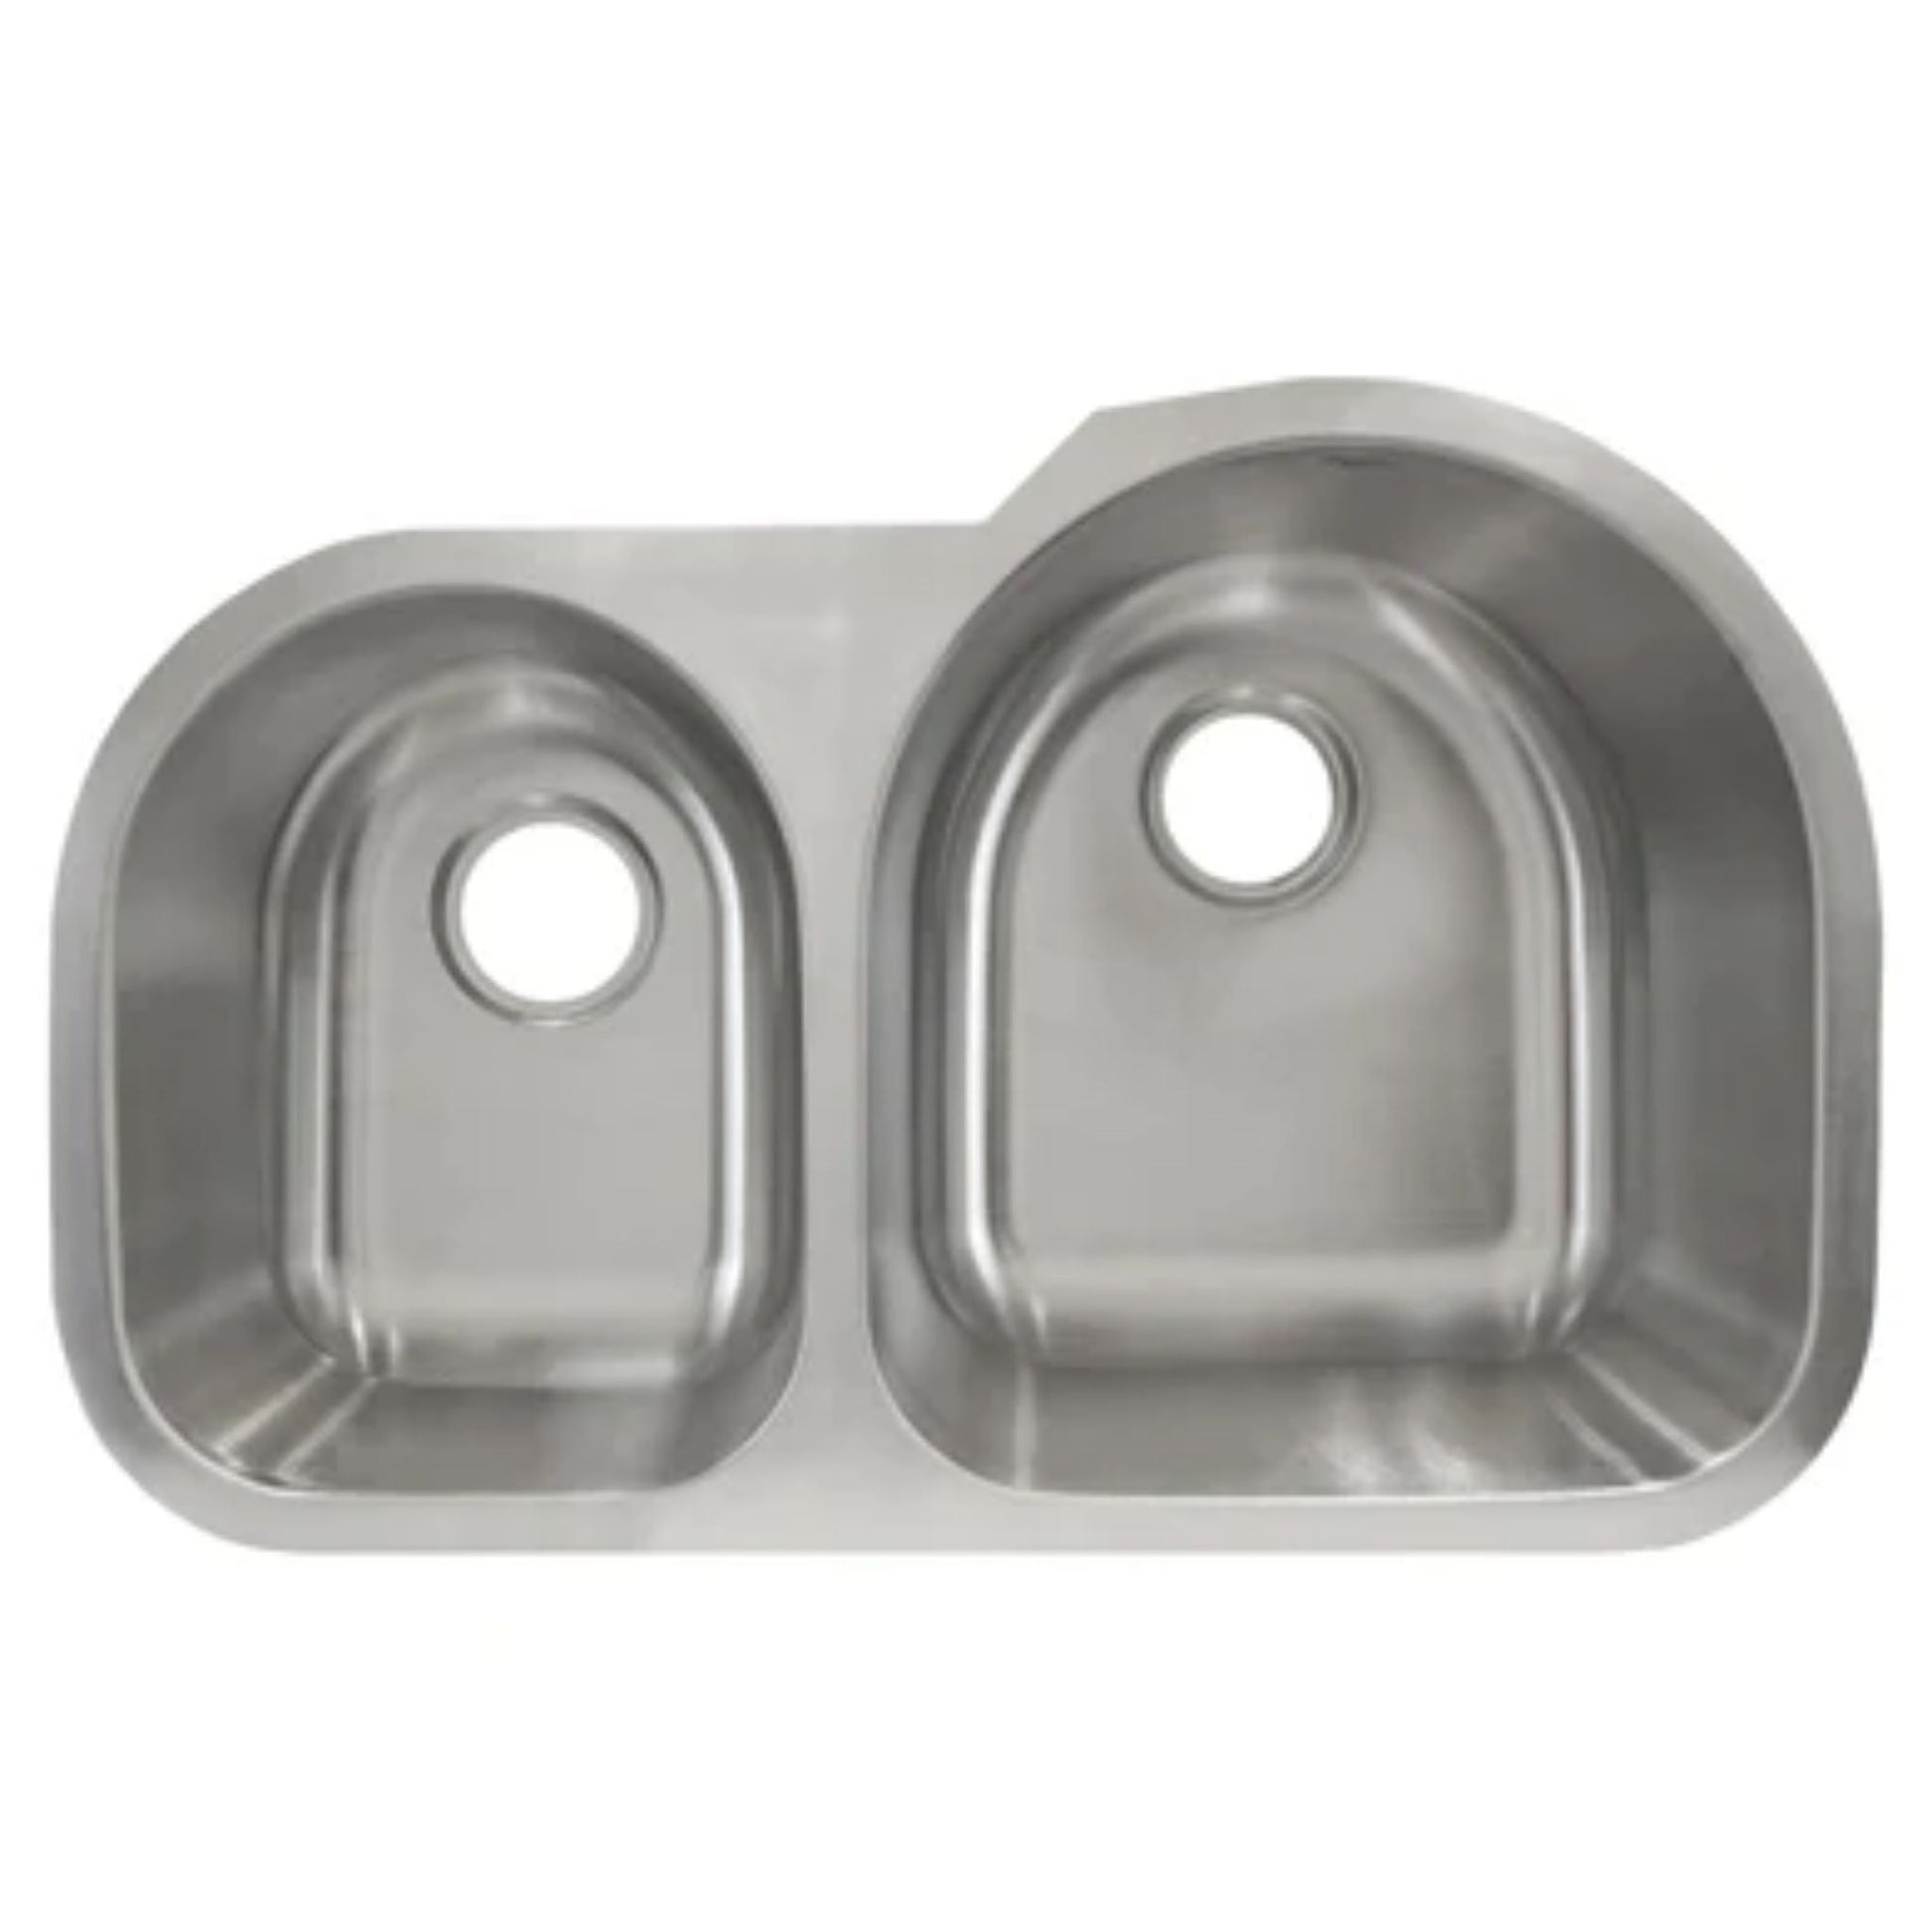 LessCare Undermount Stainless Steel Double Basin Kitchen Sink - L203L